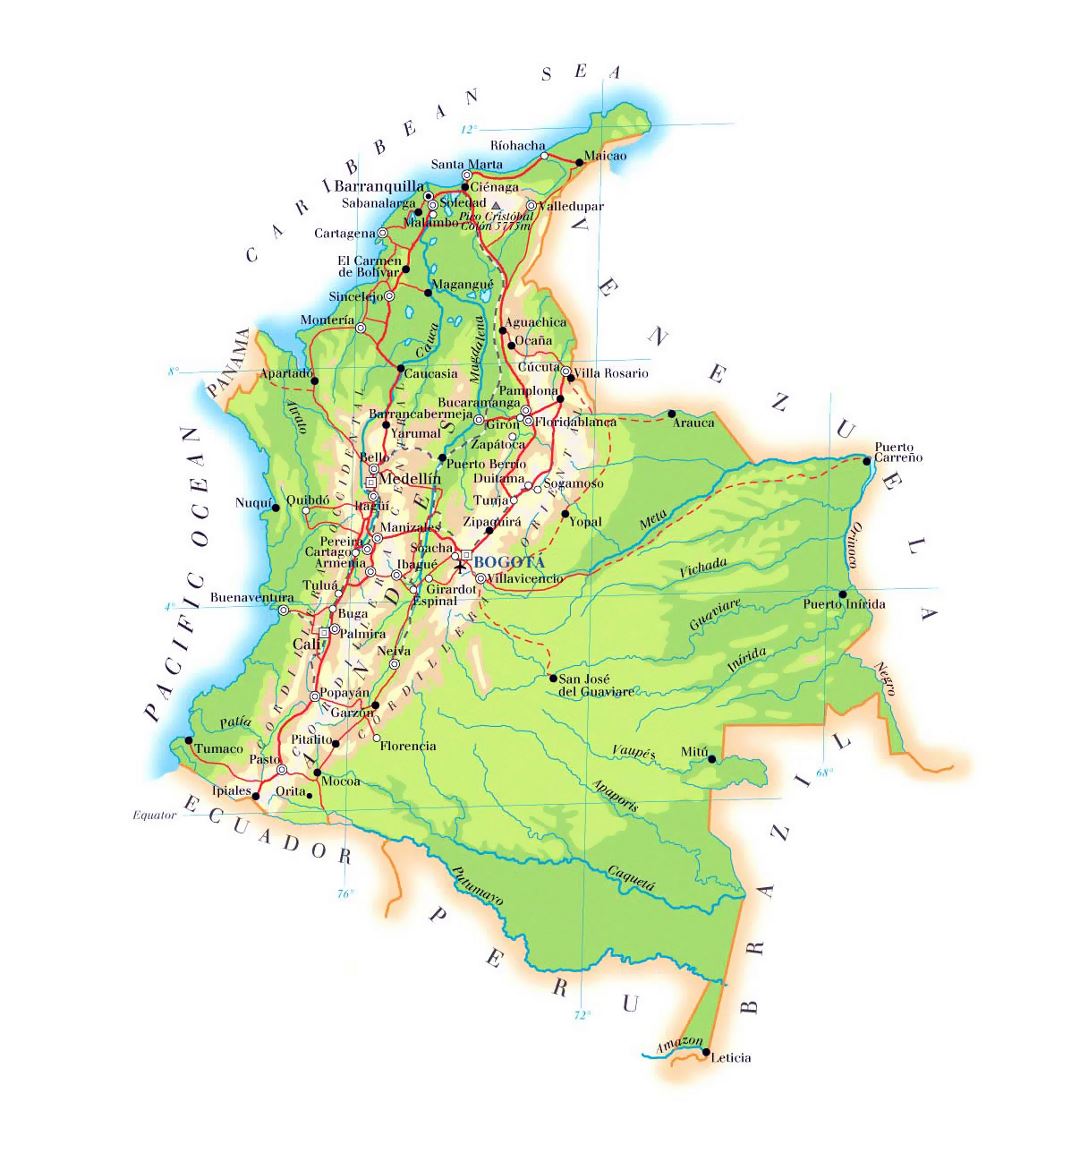 Large elevation map of Colombia with roads, cities and airports